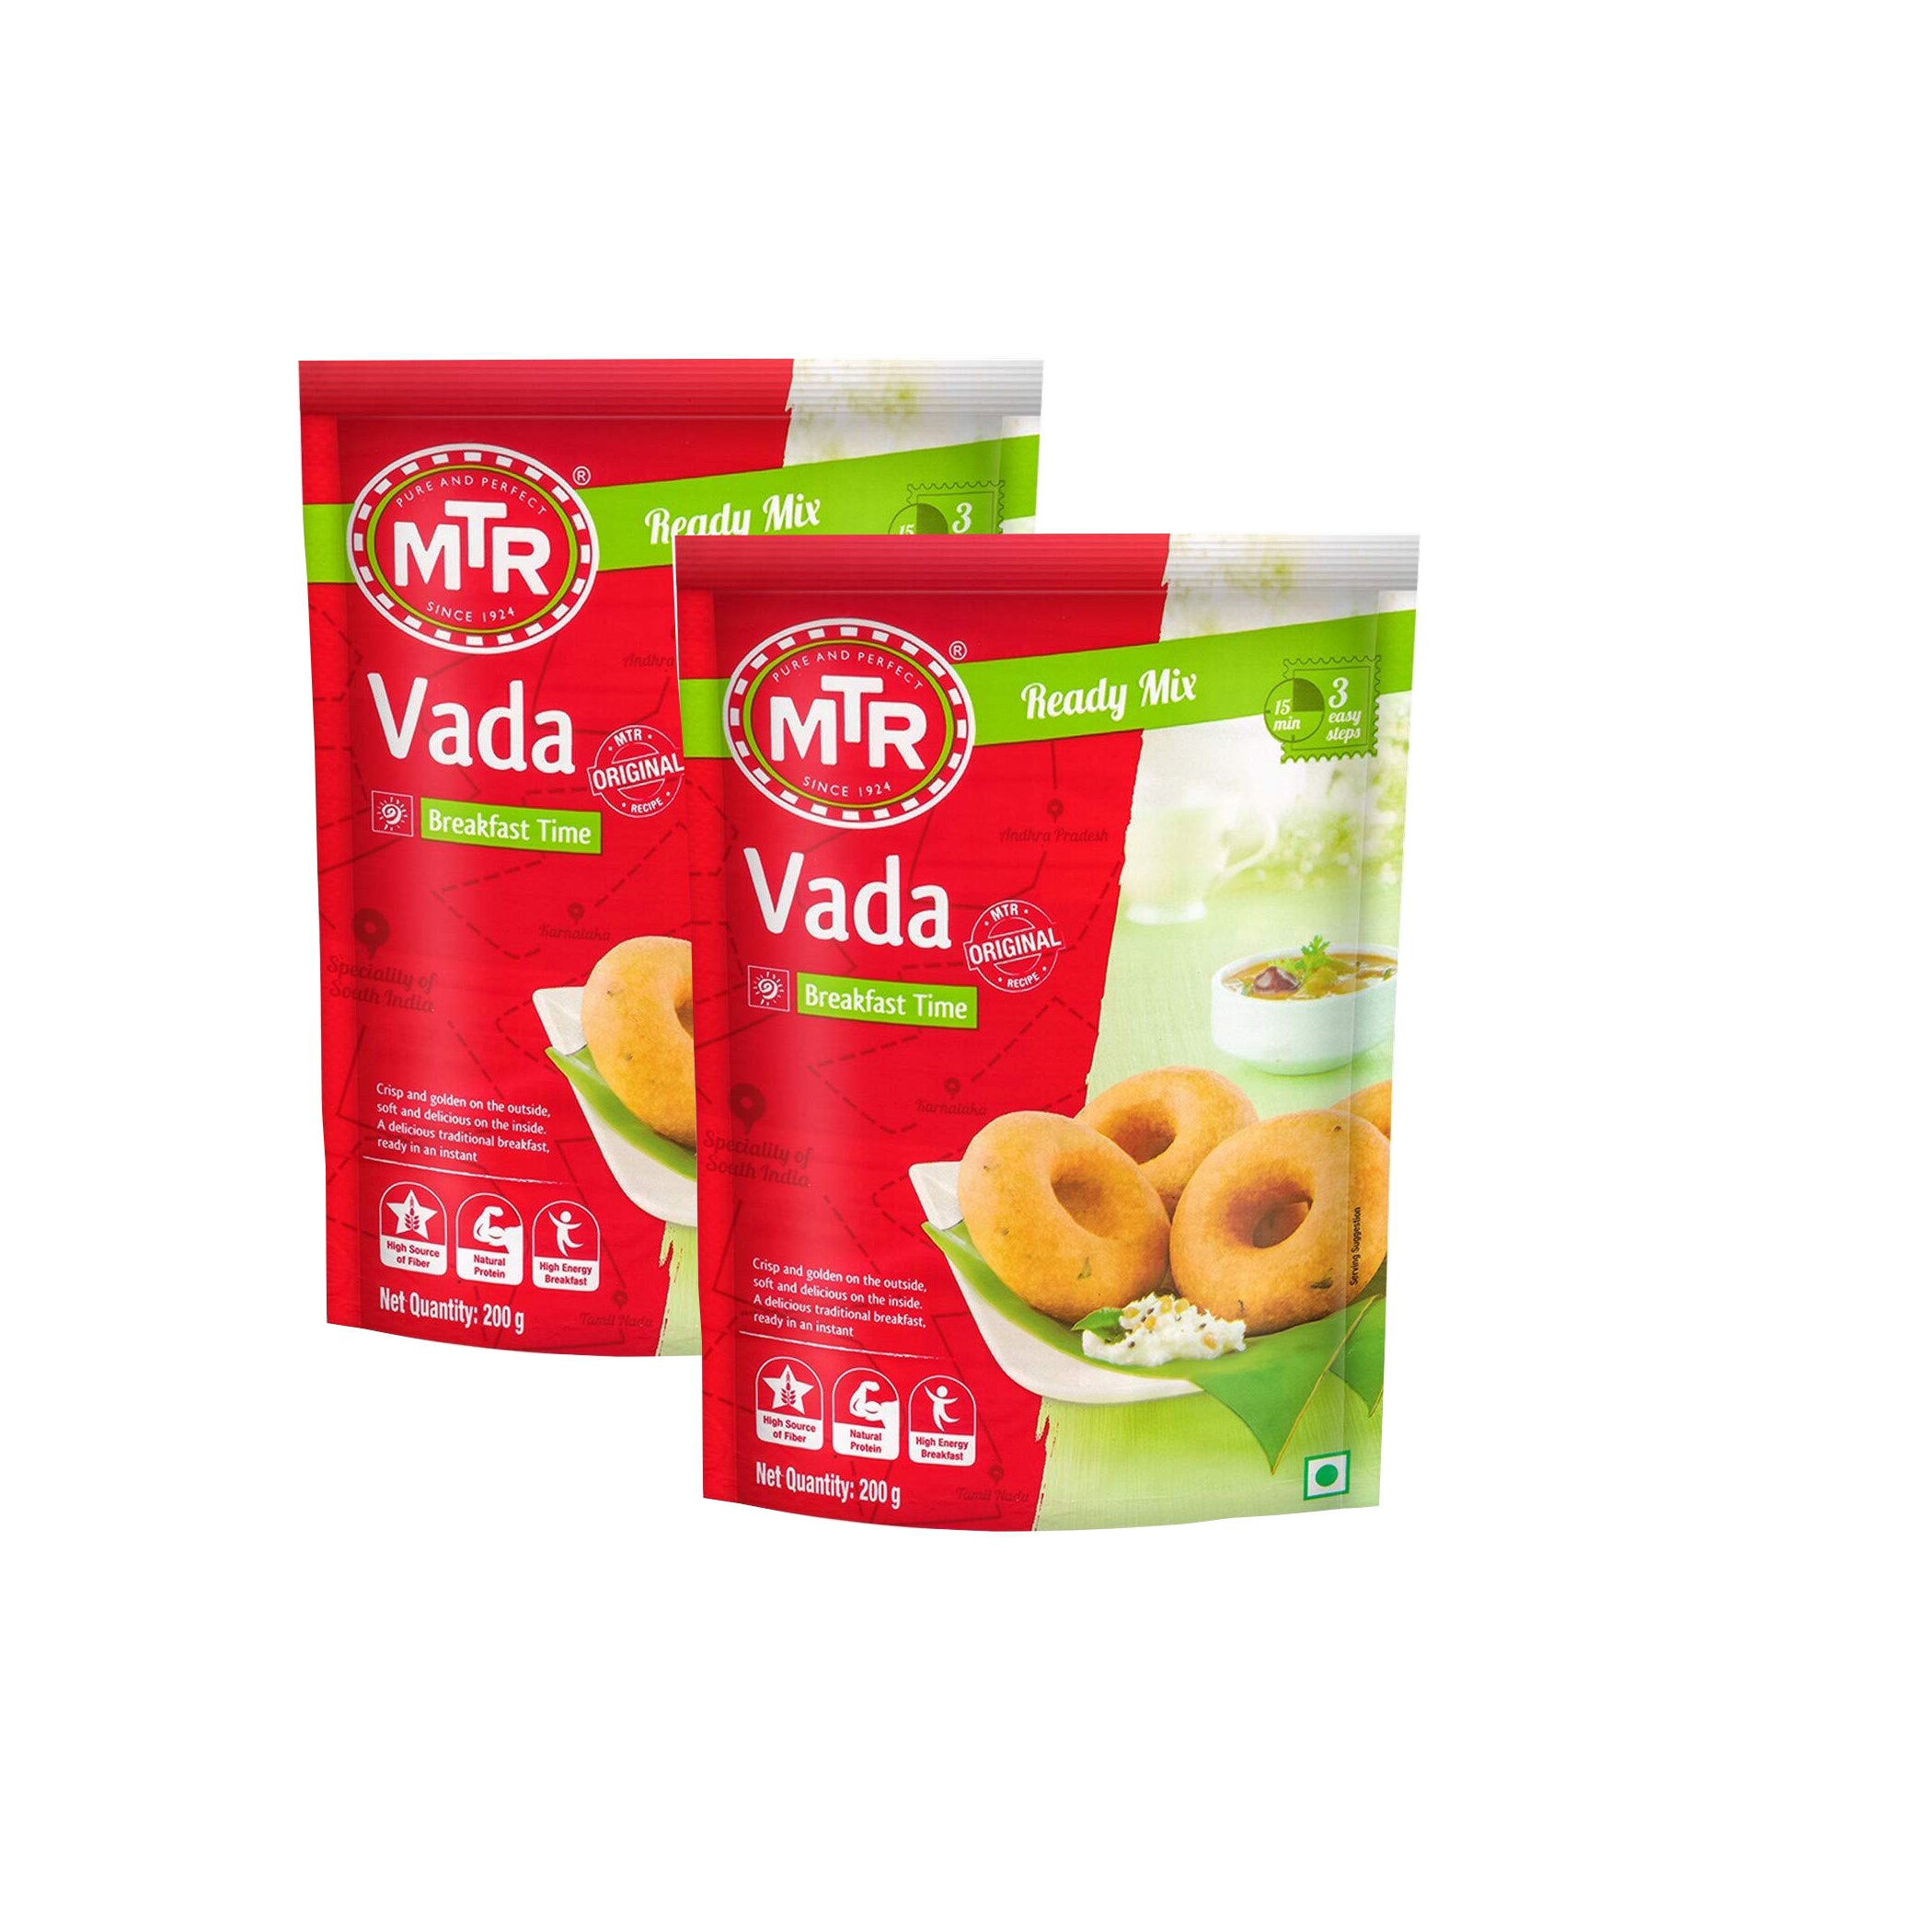 MTR Vada Mix 200g,Crispy and Golden Brown,Soft & Delicious (Pack of 2)